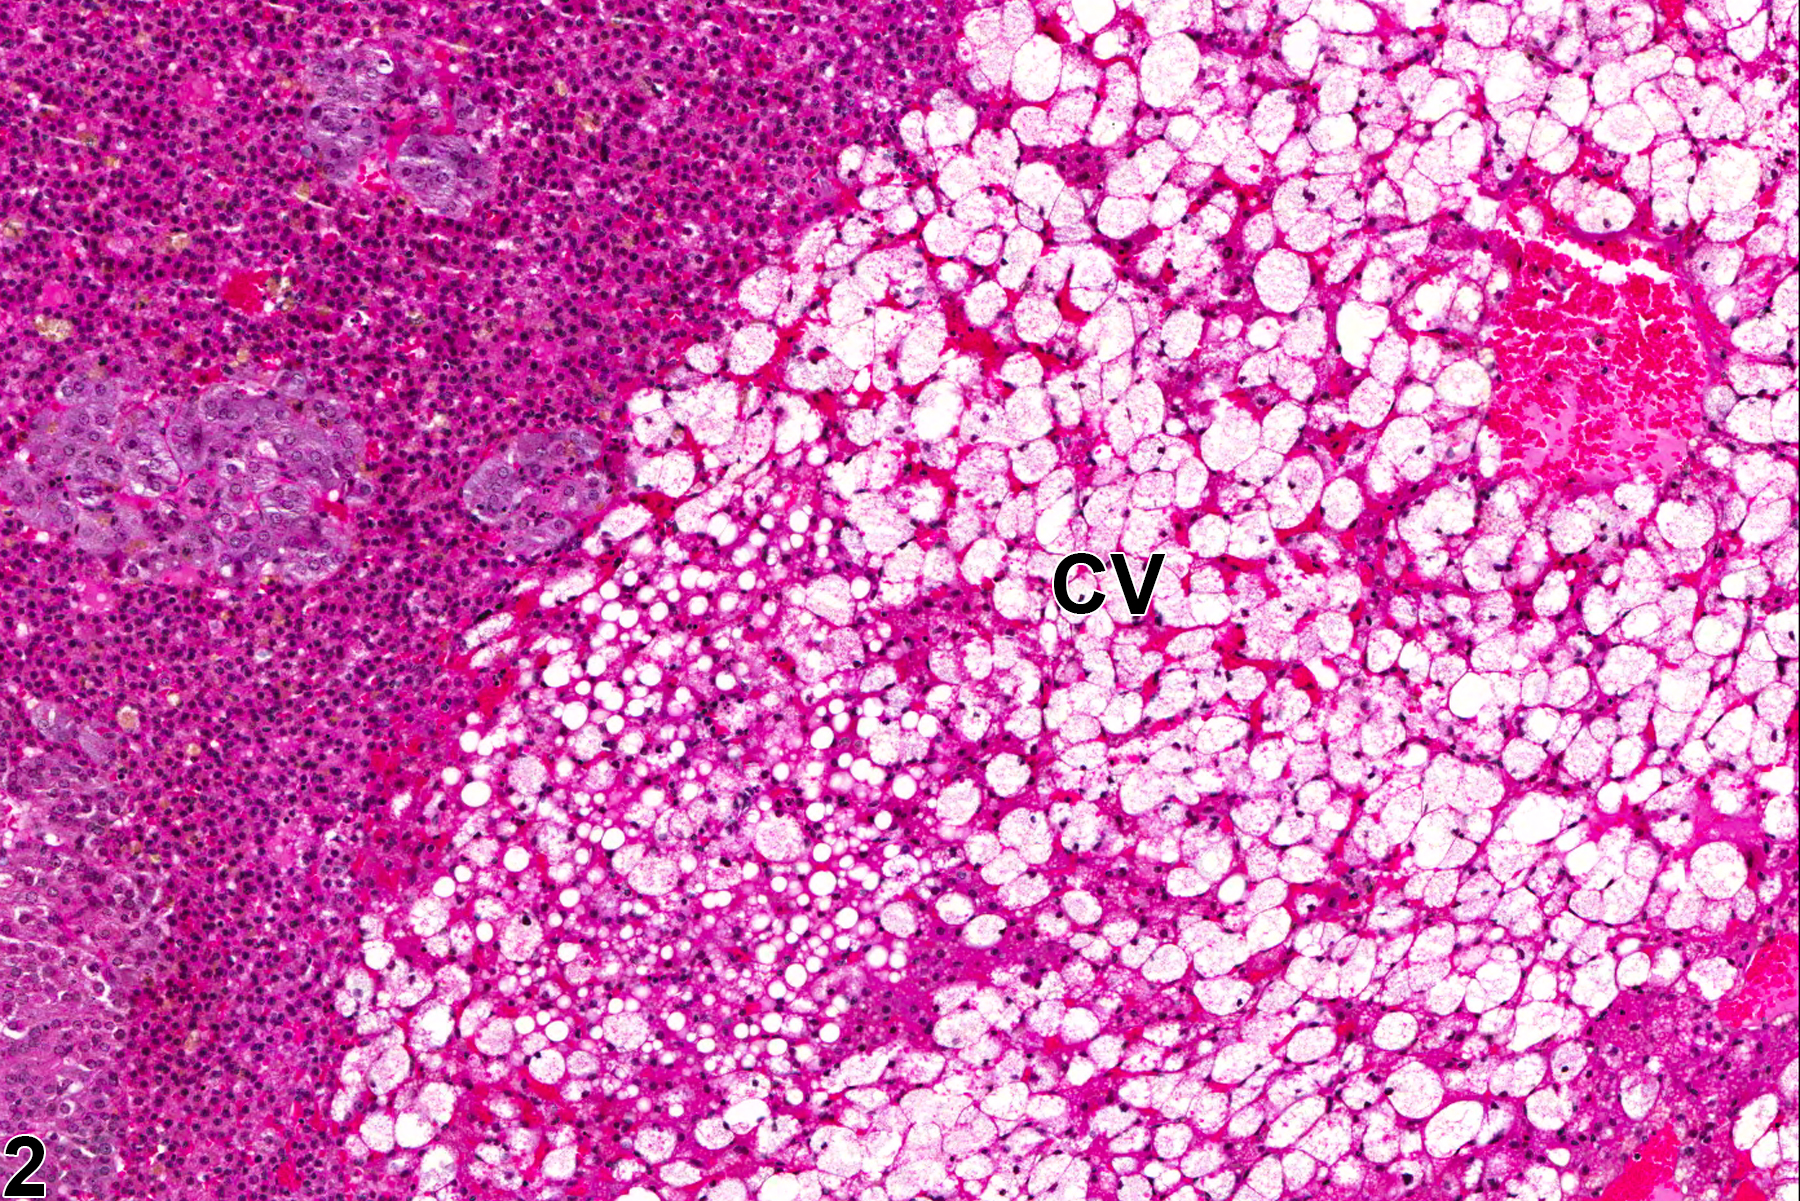 Image of vacuolization, cytoplasmic in the adrenal gland cortex from a female F344/N rat in a chronic study